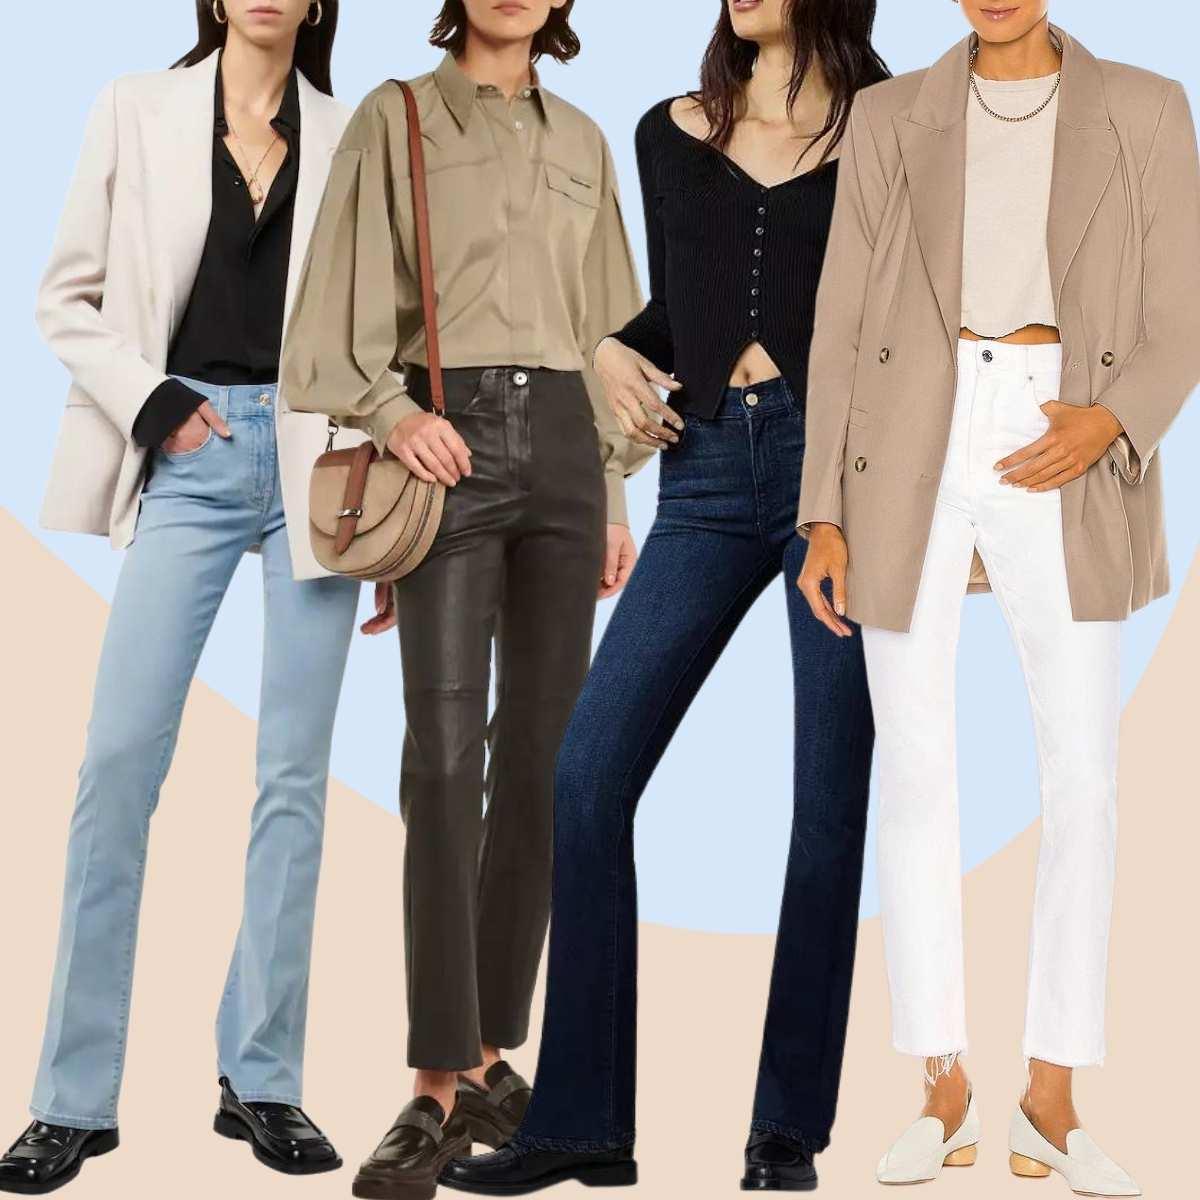 Collage of 5 women wearing cowoby boots and bootcut jeans outfits.